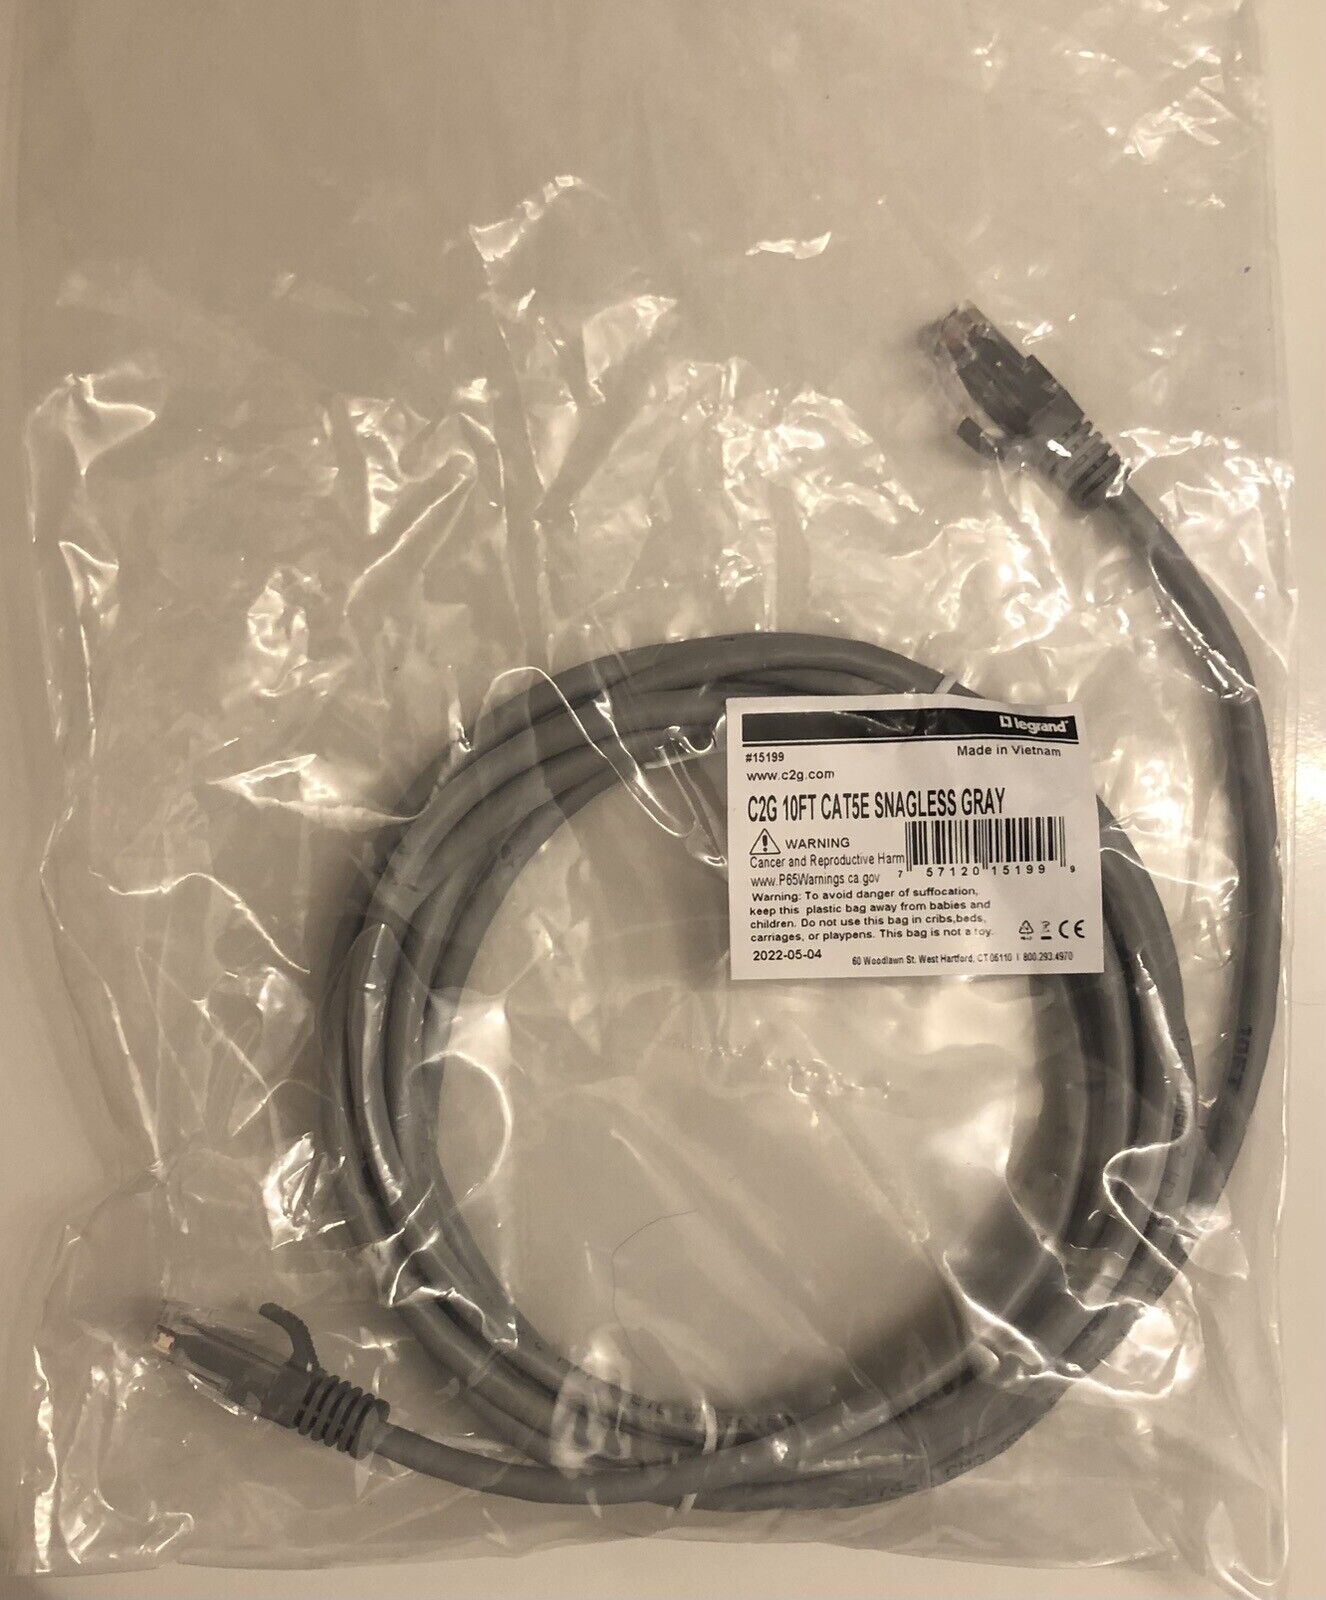 NEW - Cables To Go #15199 10ft Cat5e Snagless Patch Cable Grey Legrand 15199